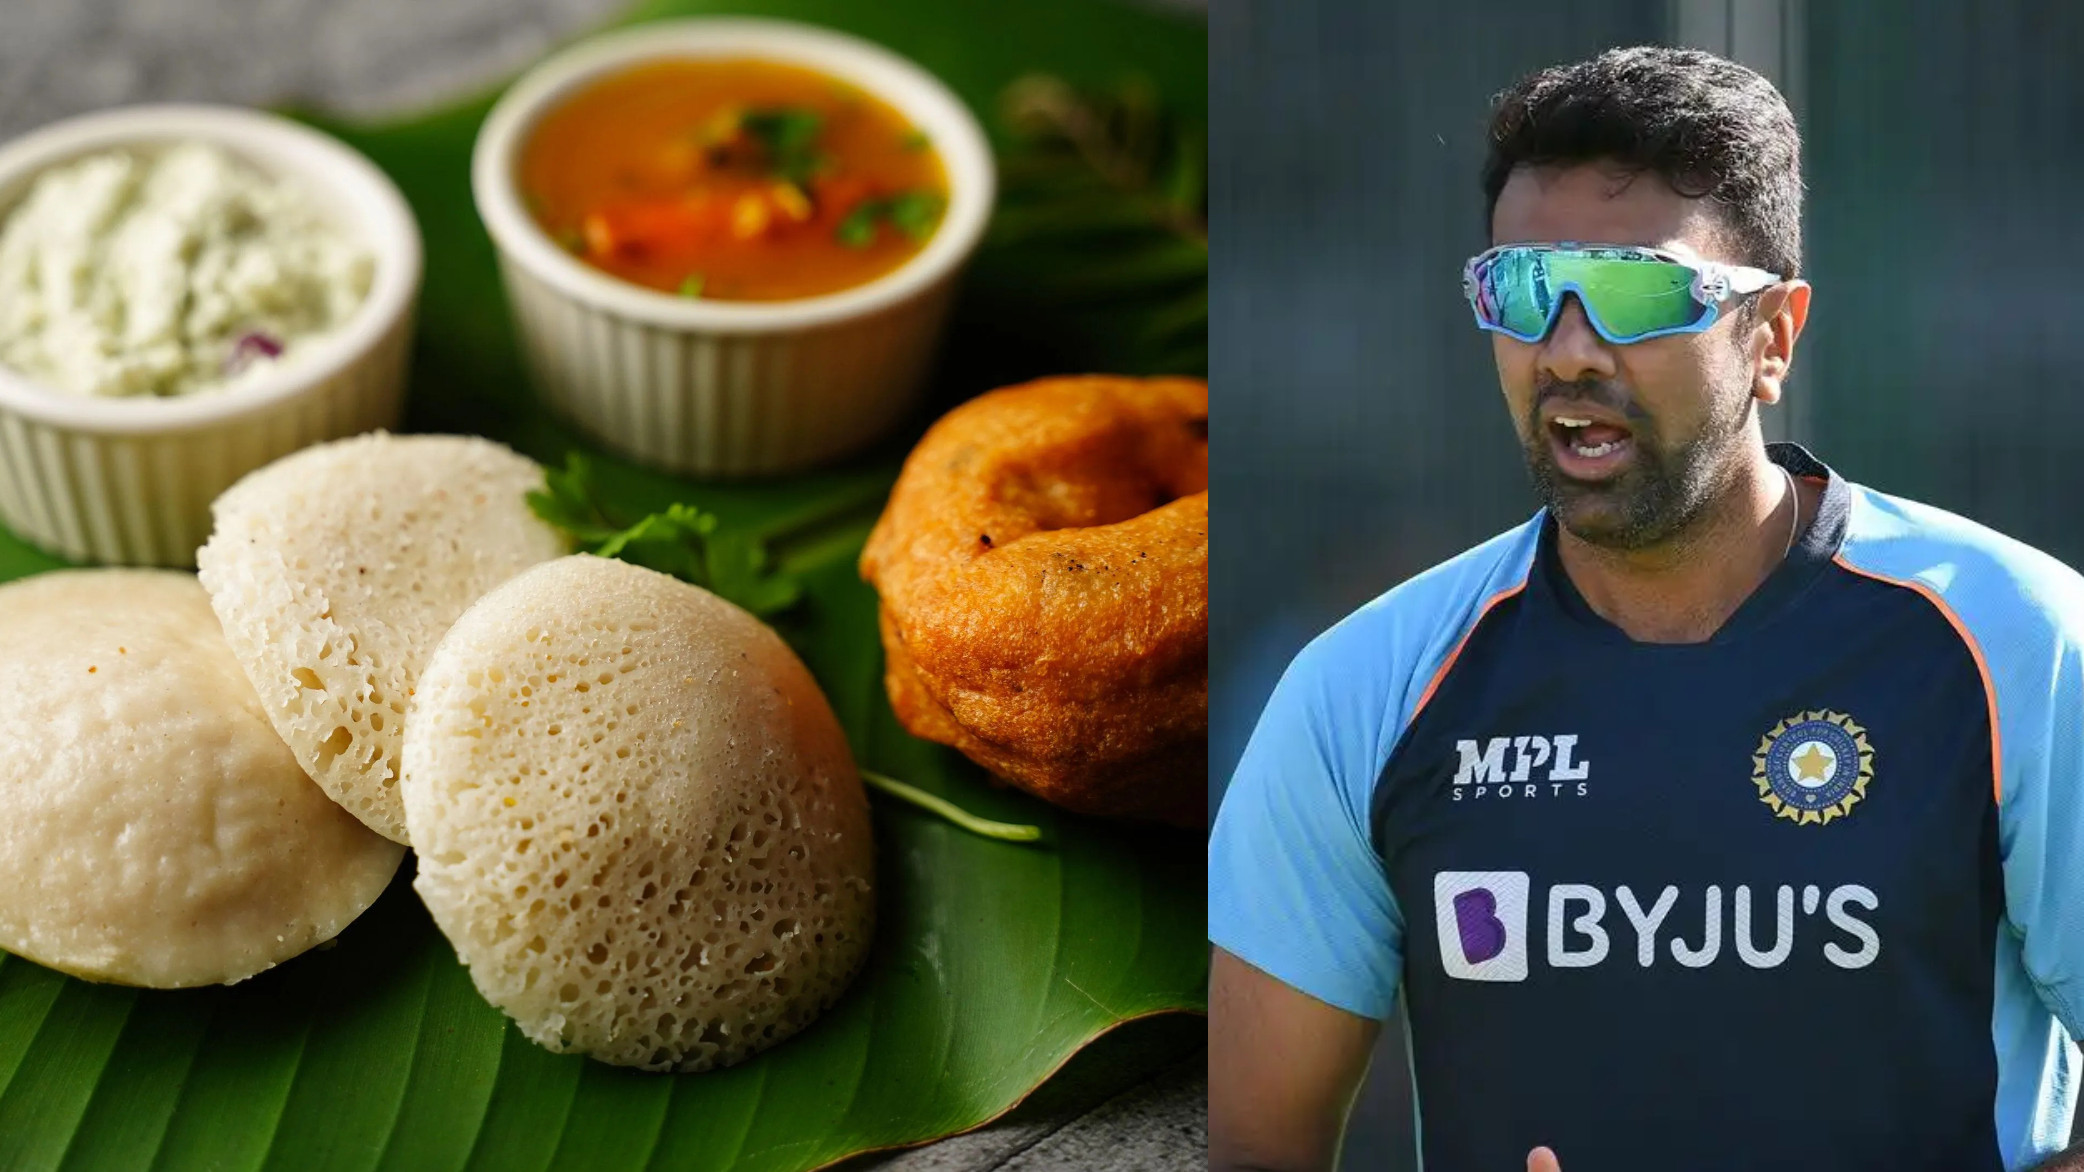 R Ashwin takes a hilarious jibe at a fan on being asked to bring idli-sambhar; fans react